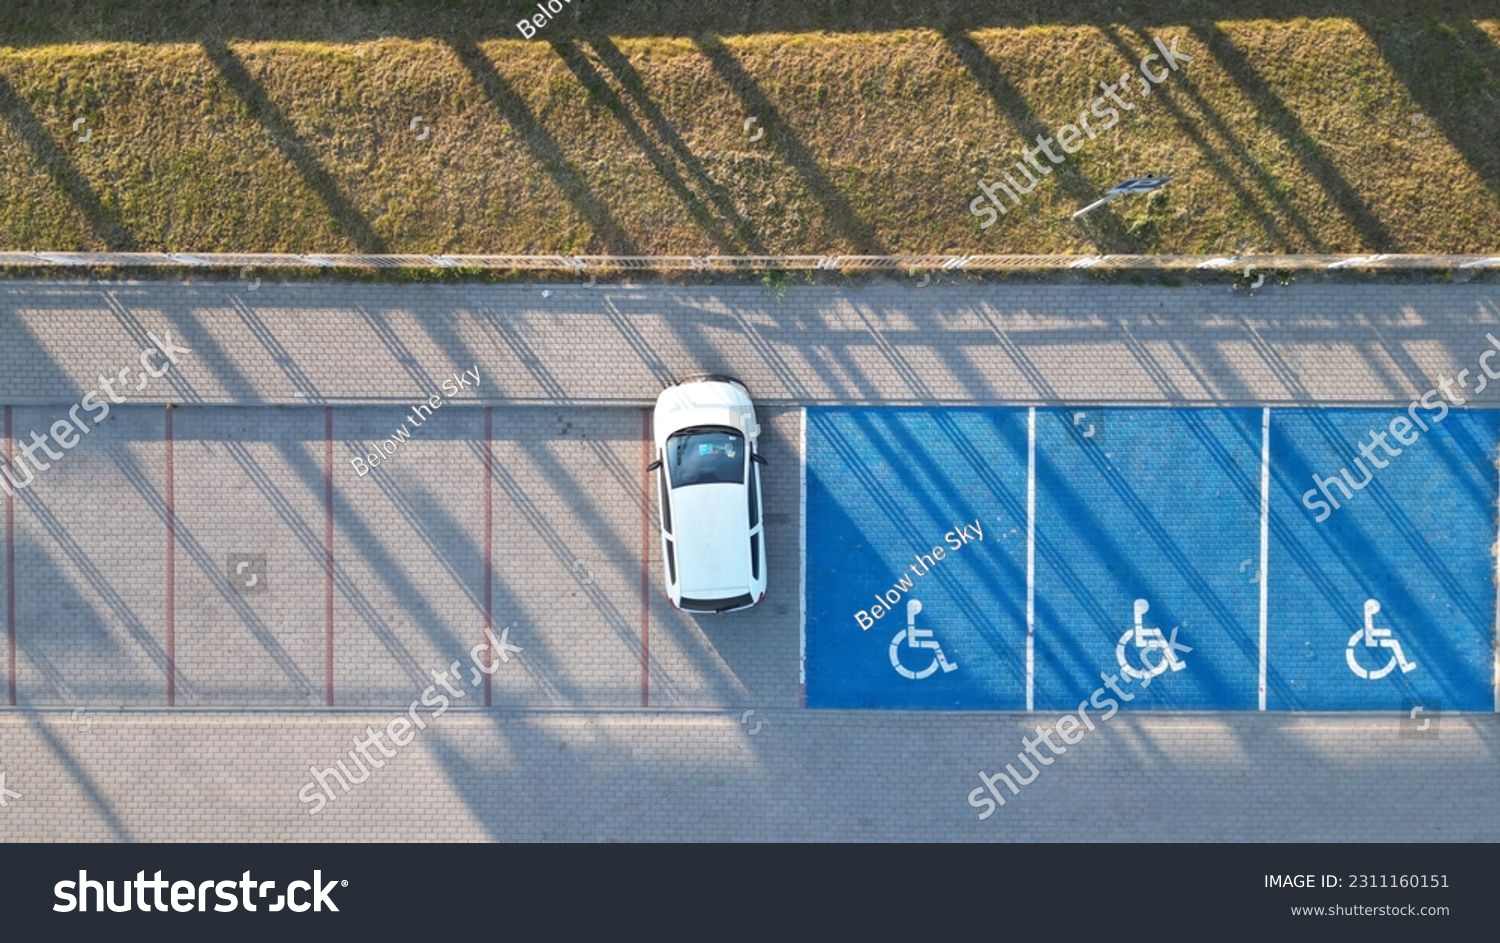 Outdoor car parking with handicapped symbol icon close to railway station.. Parking places reserved for disabled person. Aerial drone view. #2311160151